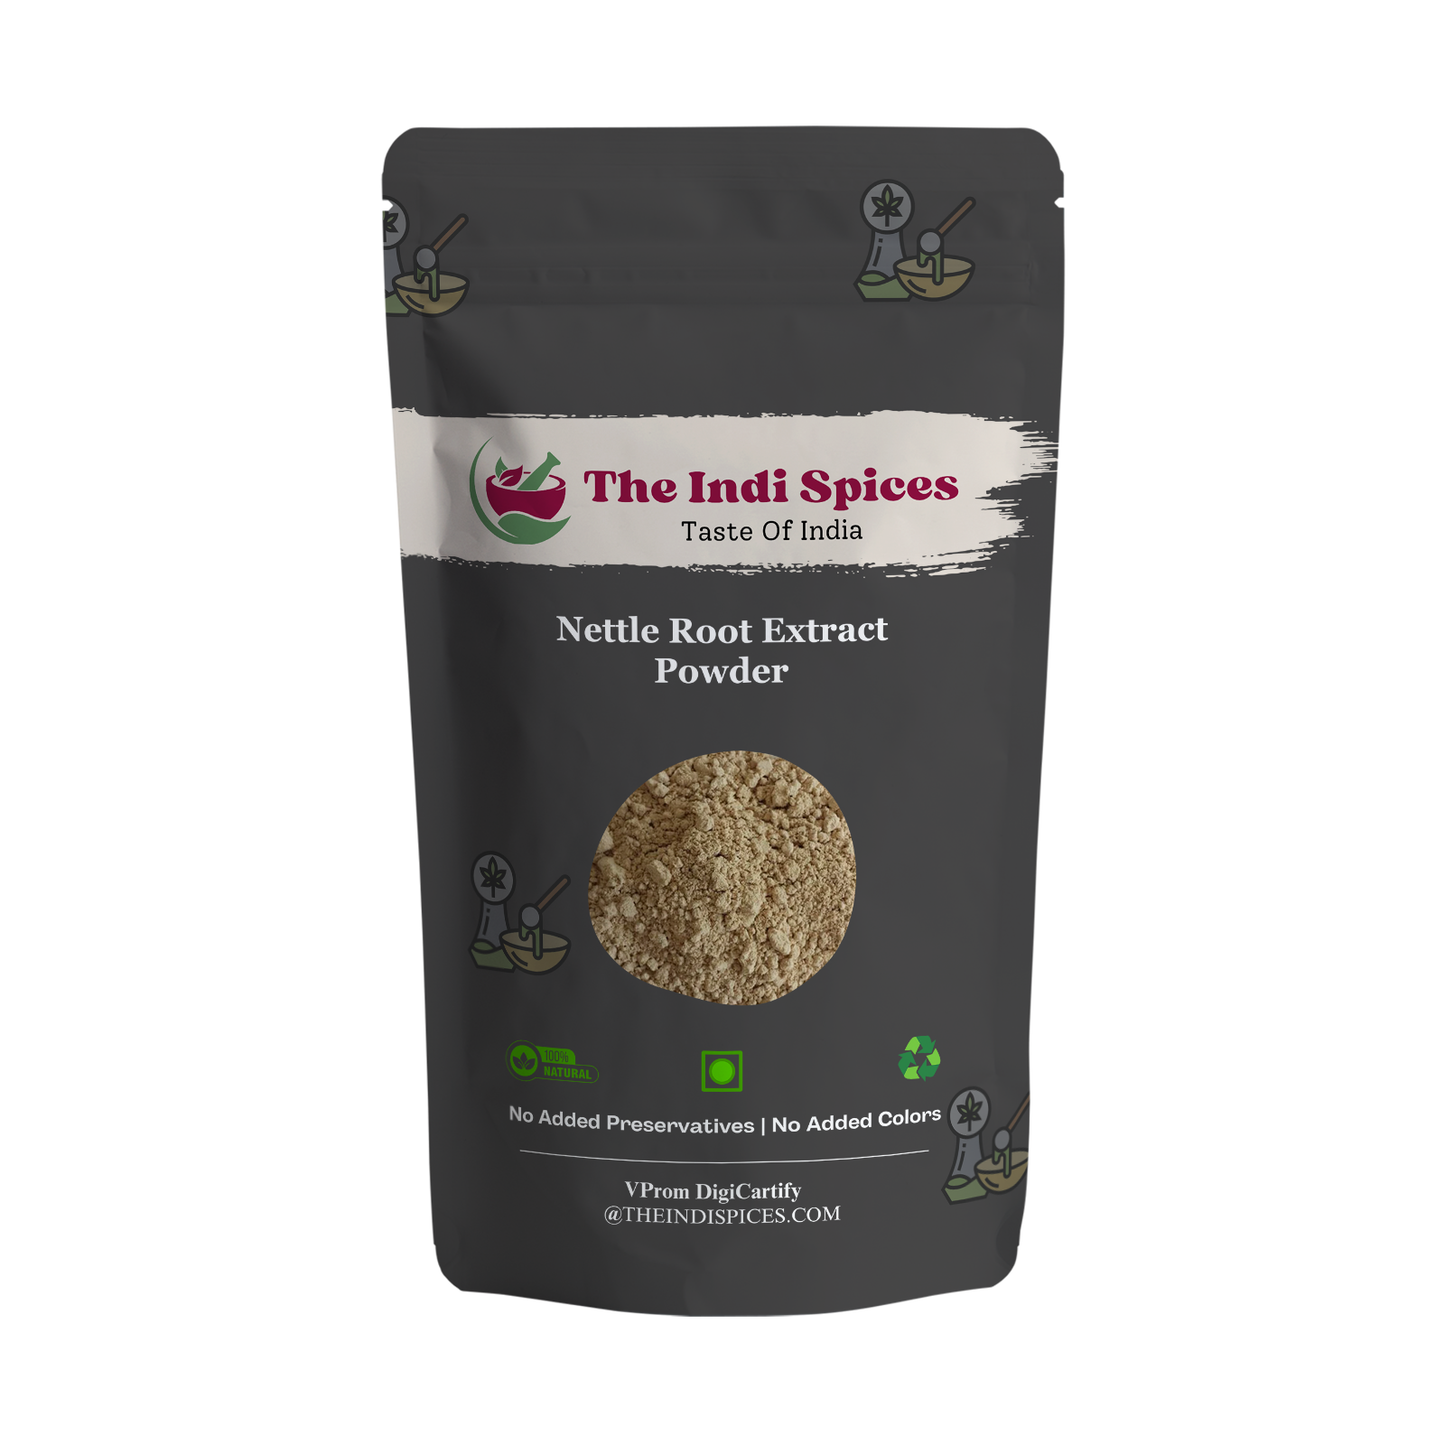 Nettle Root Extract Powder